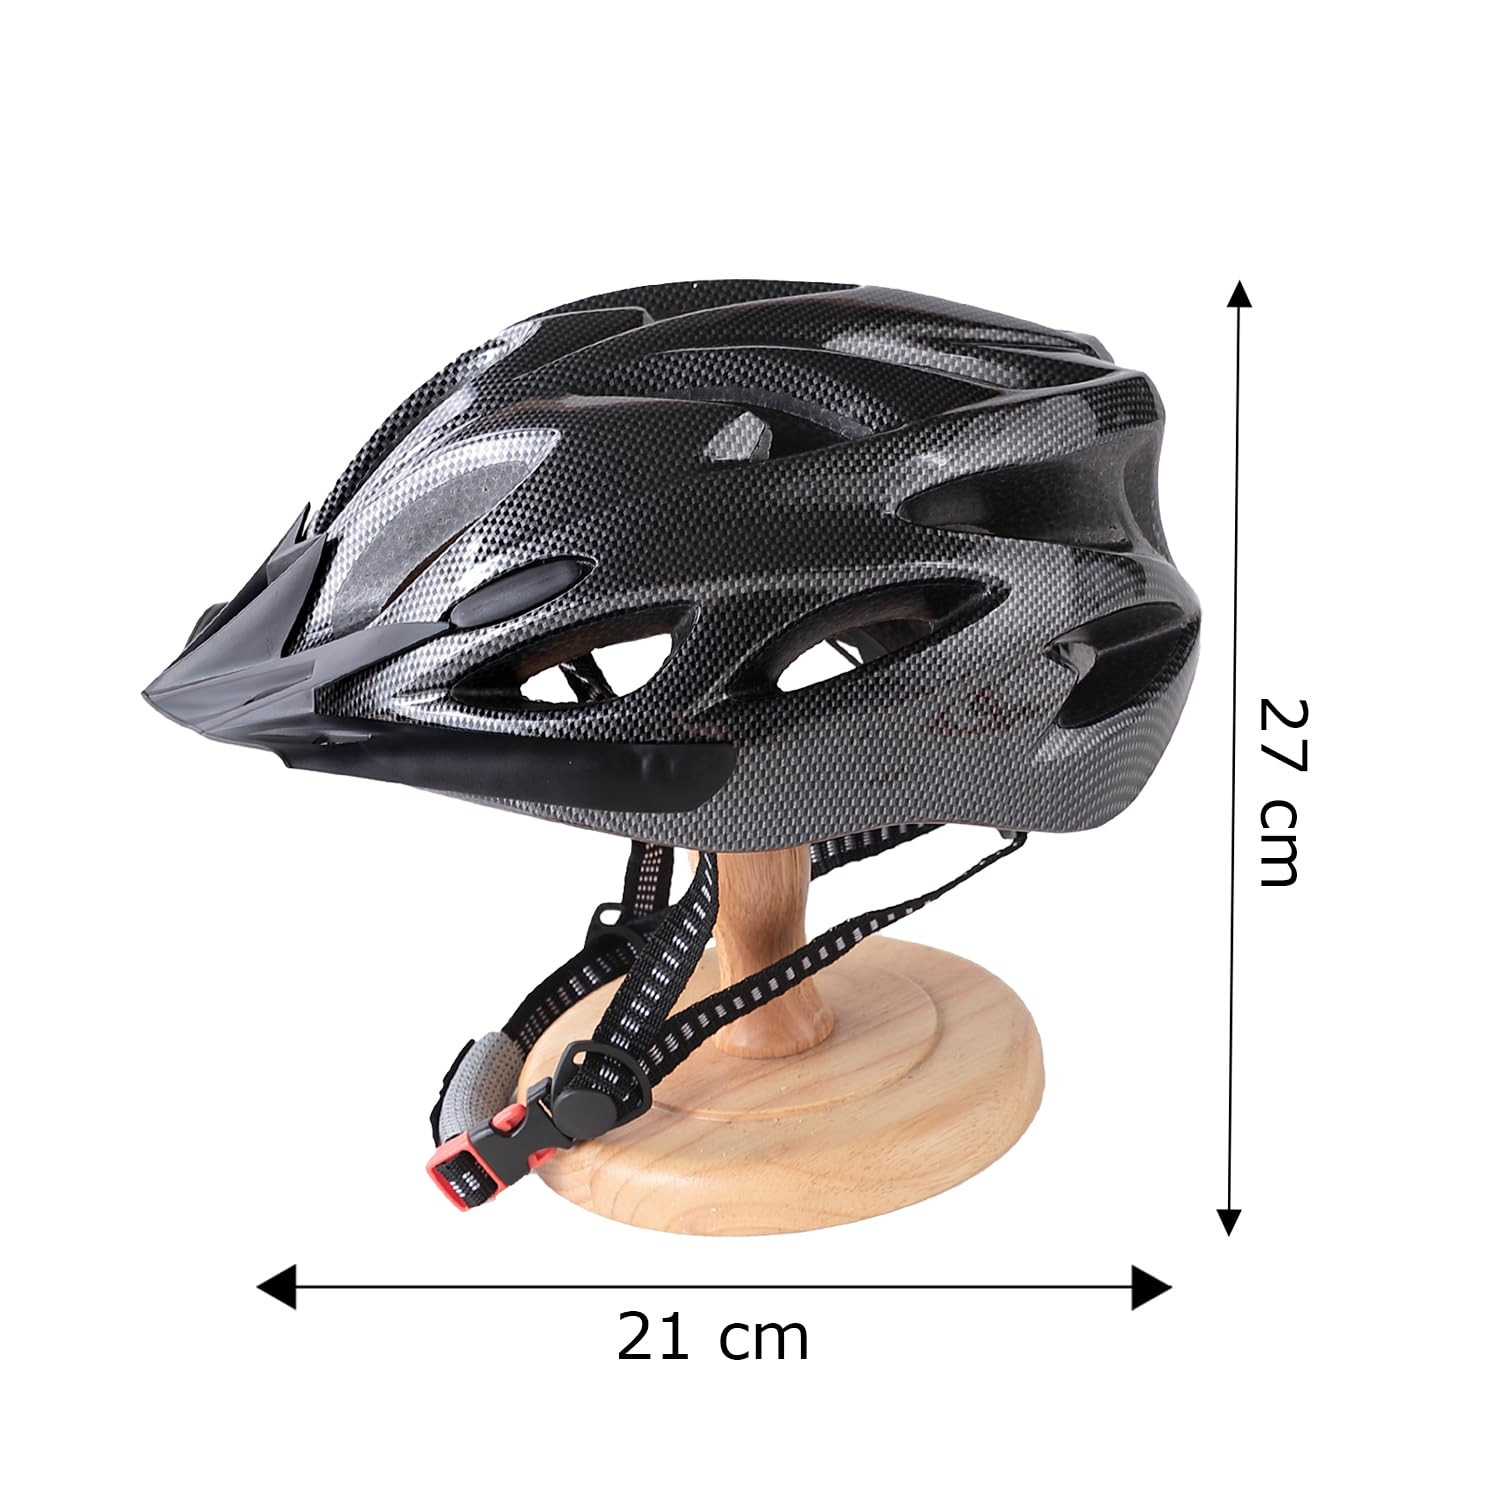 Kuber Industries Cycling Helmet with Detachable Visor|Helmet for Mountain, Road Bike & Skating|Breathable & Adjustable Bicycle Helmet|Ideal for Adults and Kids (Black)